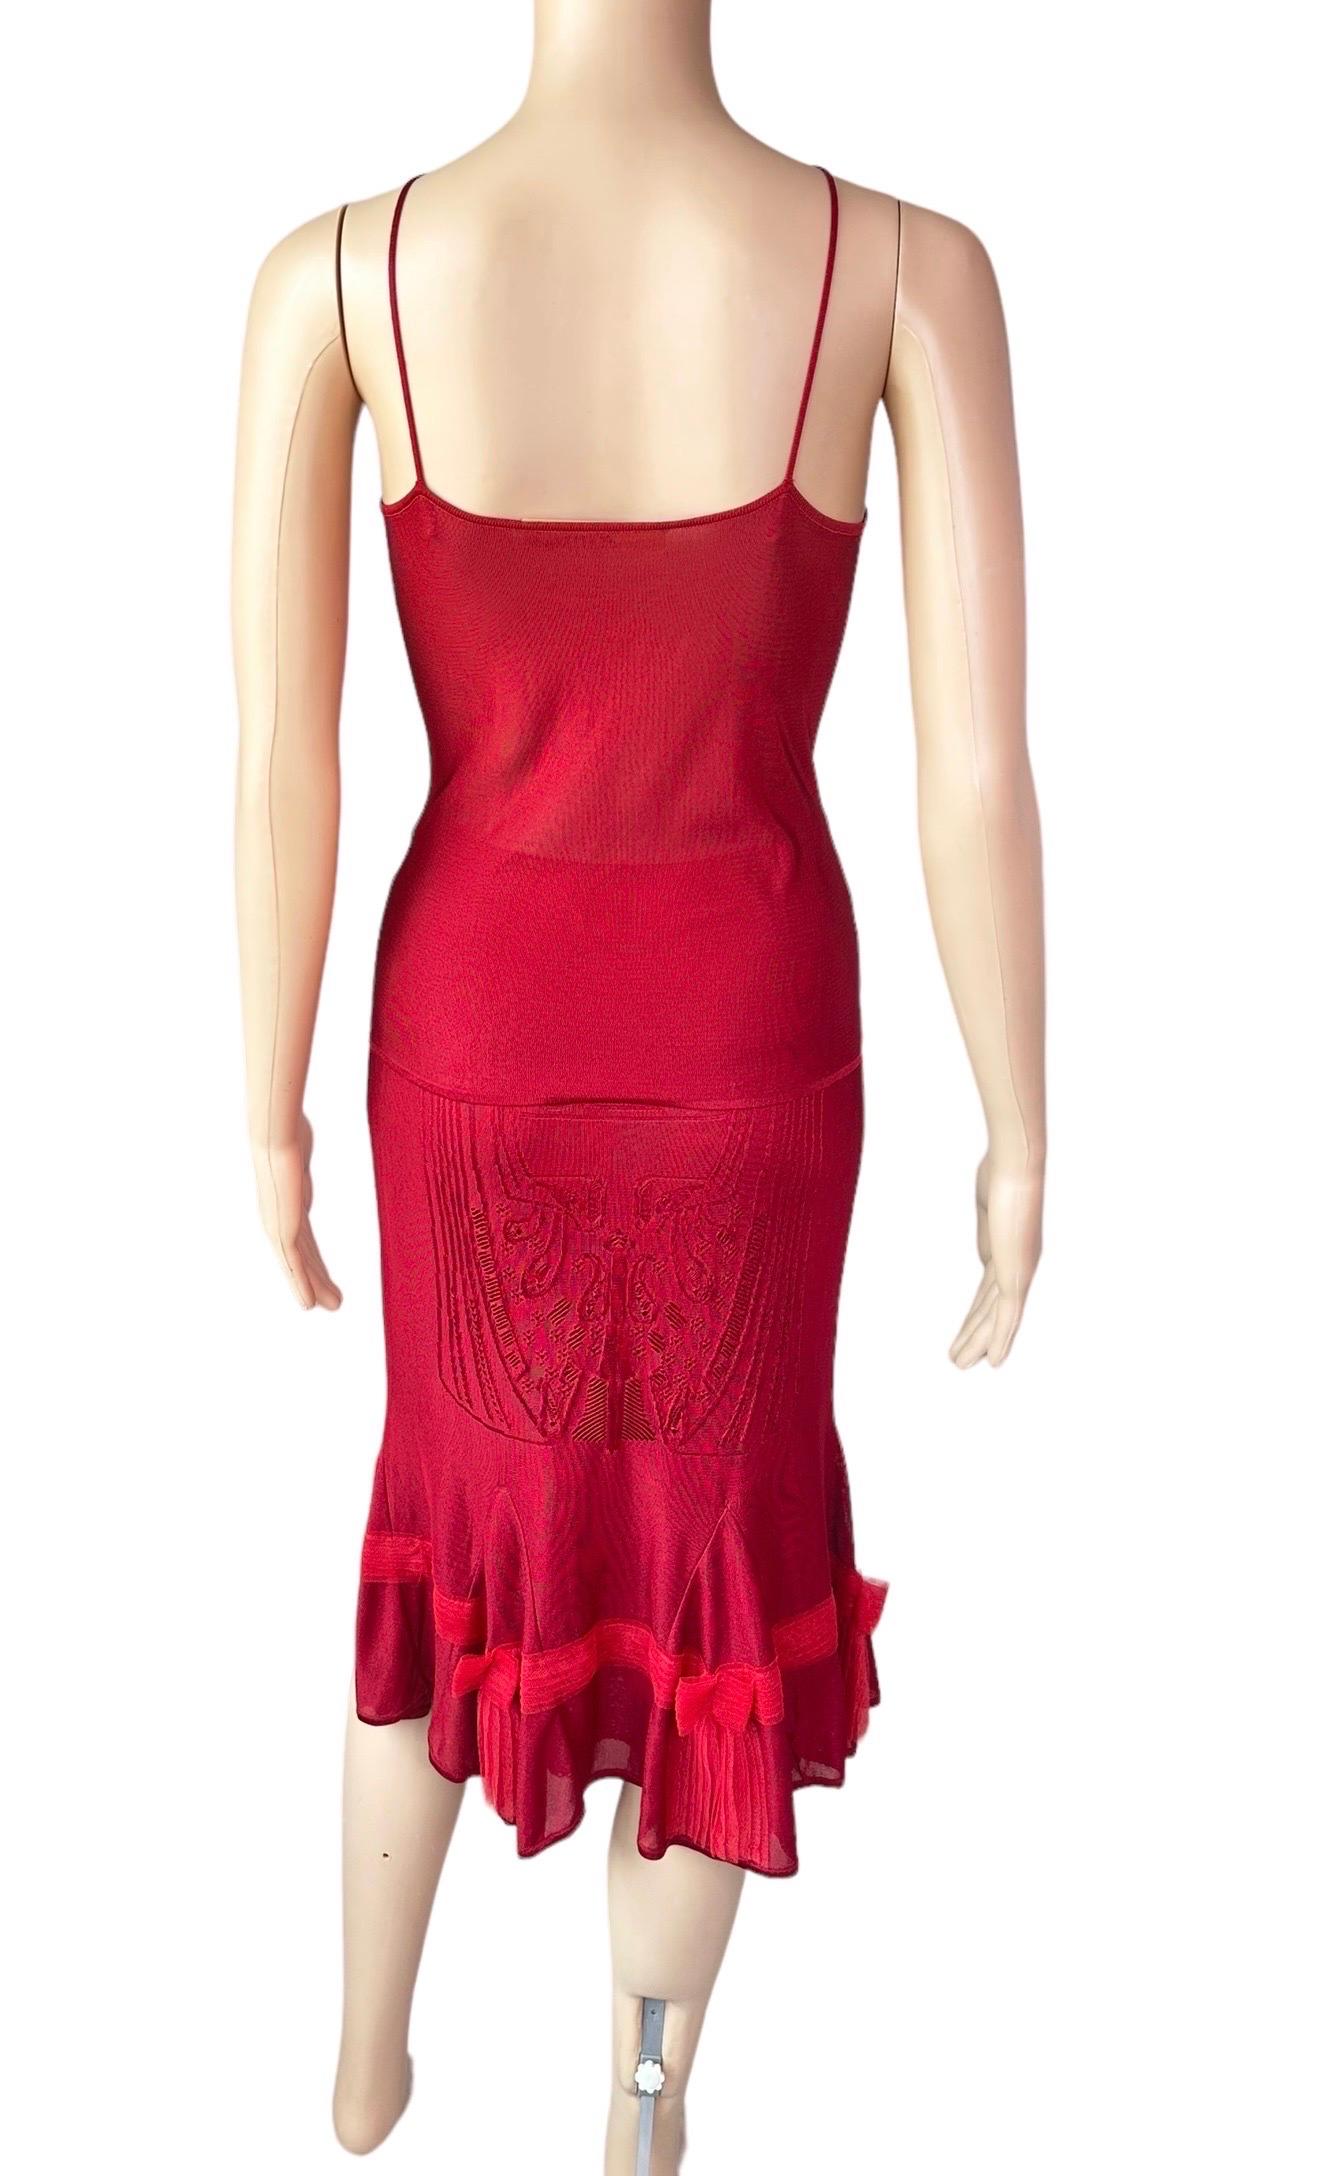 John Galliano F/W 2004 Open Knit Top and Skirt 2 Piece Set Ensemble In Good Condition For Sale In Naples, FL